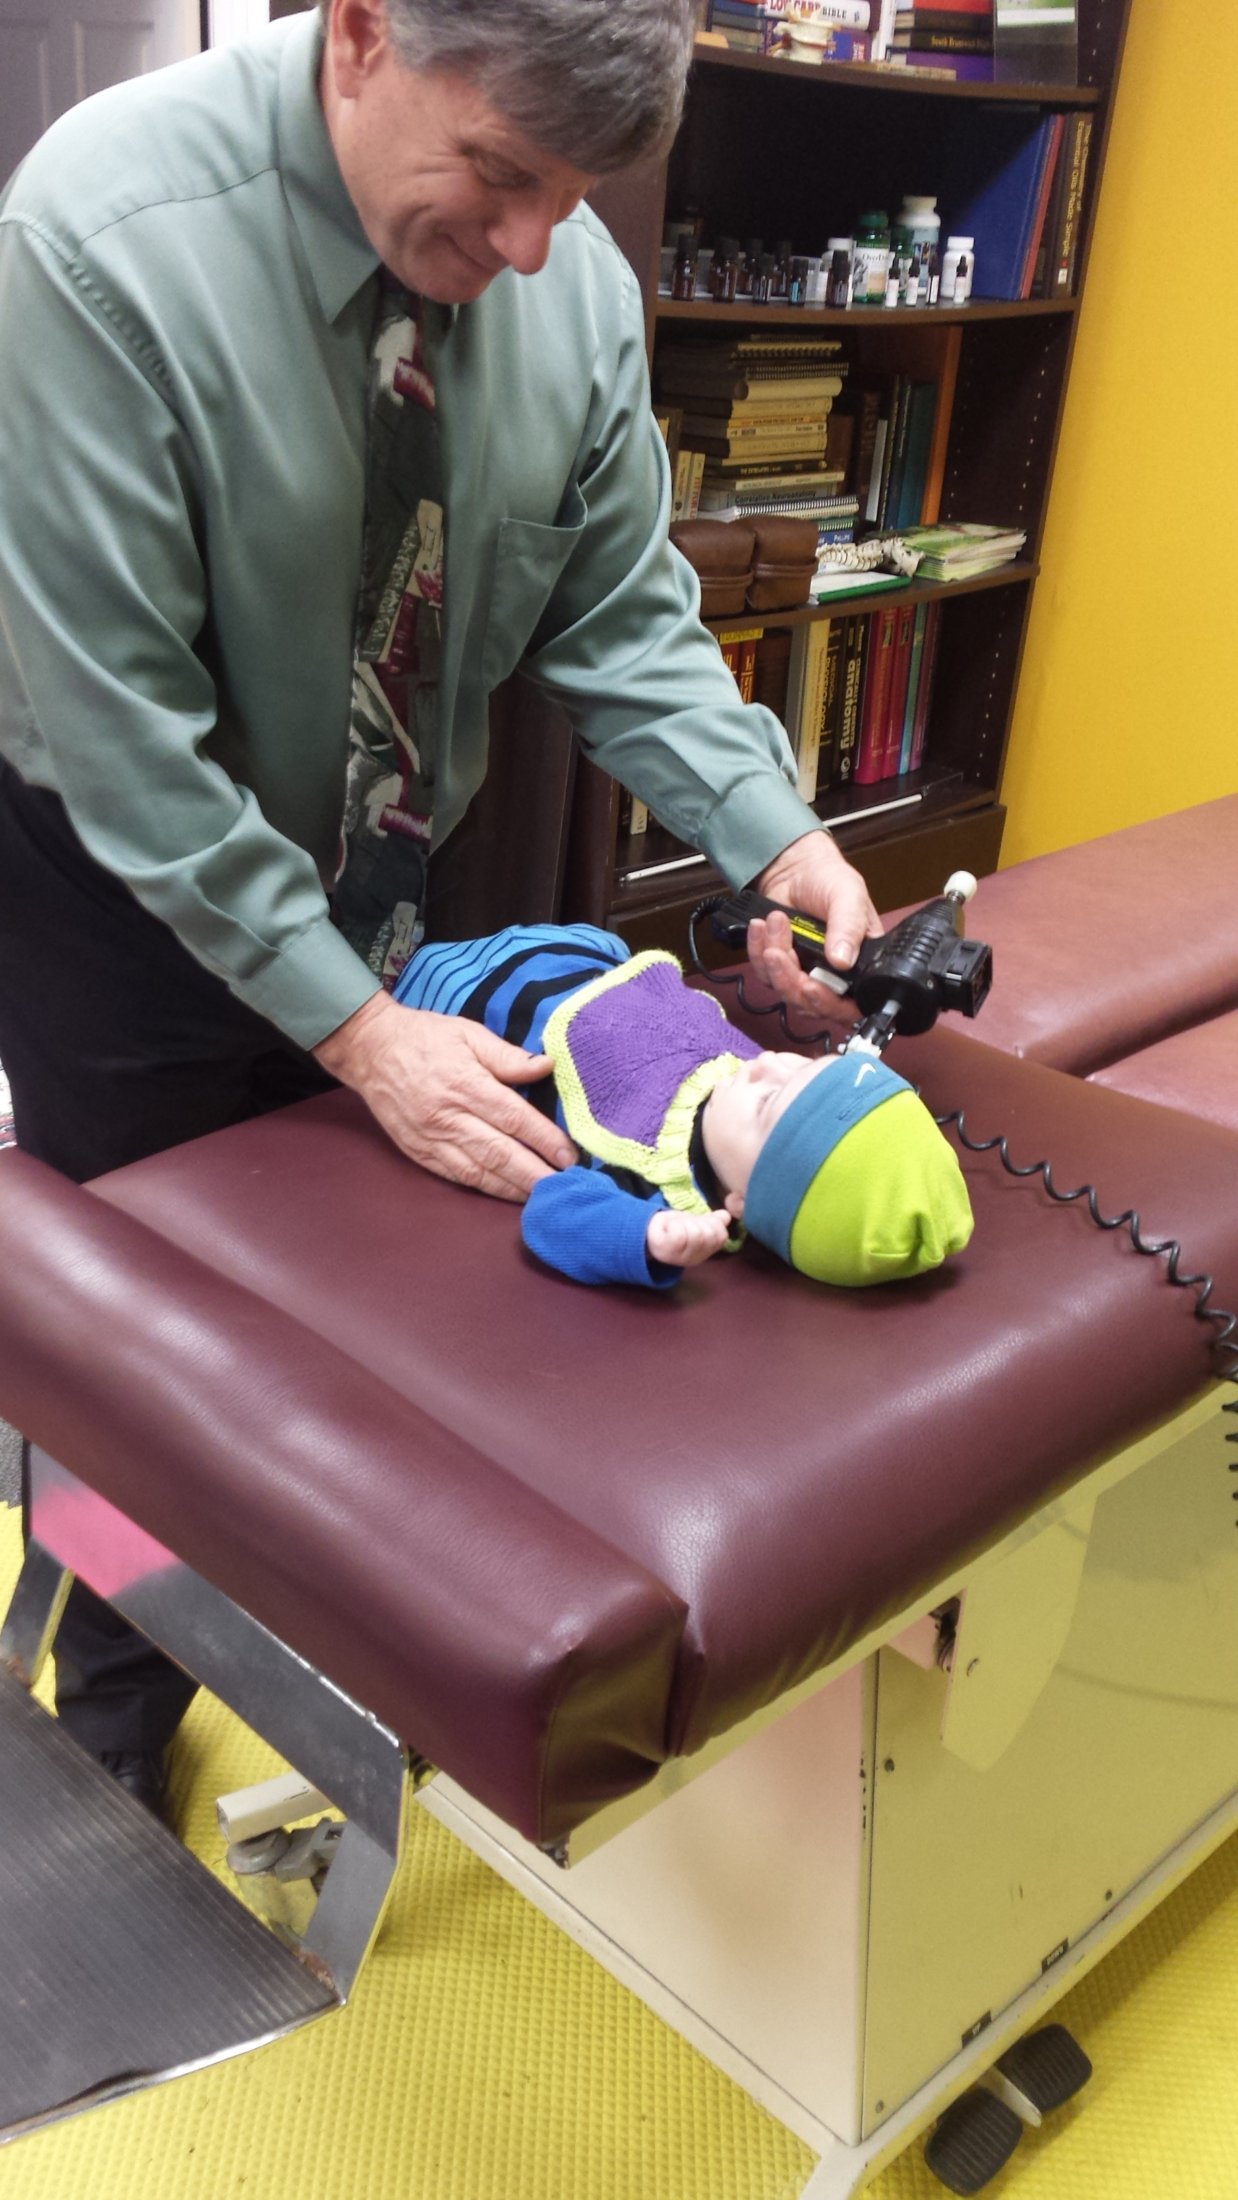 Chiropractic Infant Adjusting is Safe and Necessary